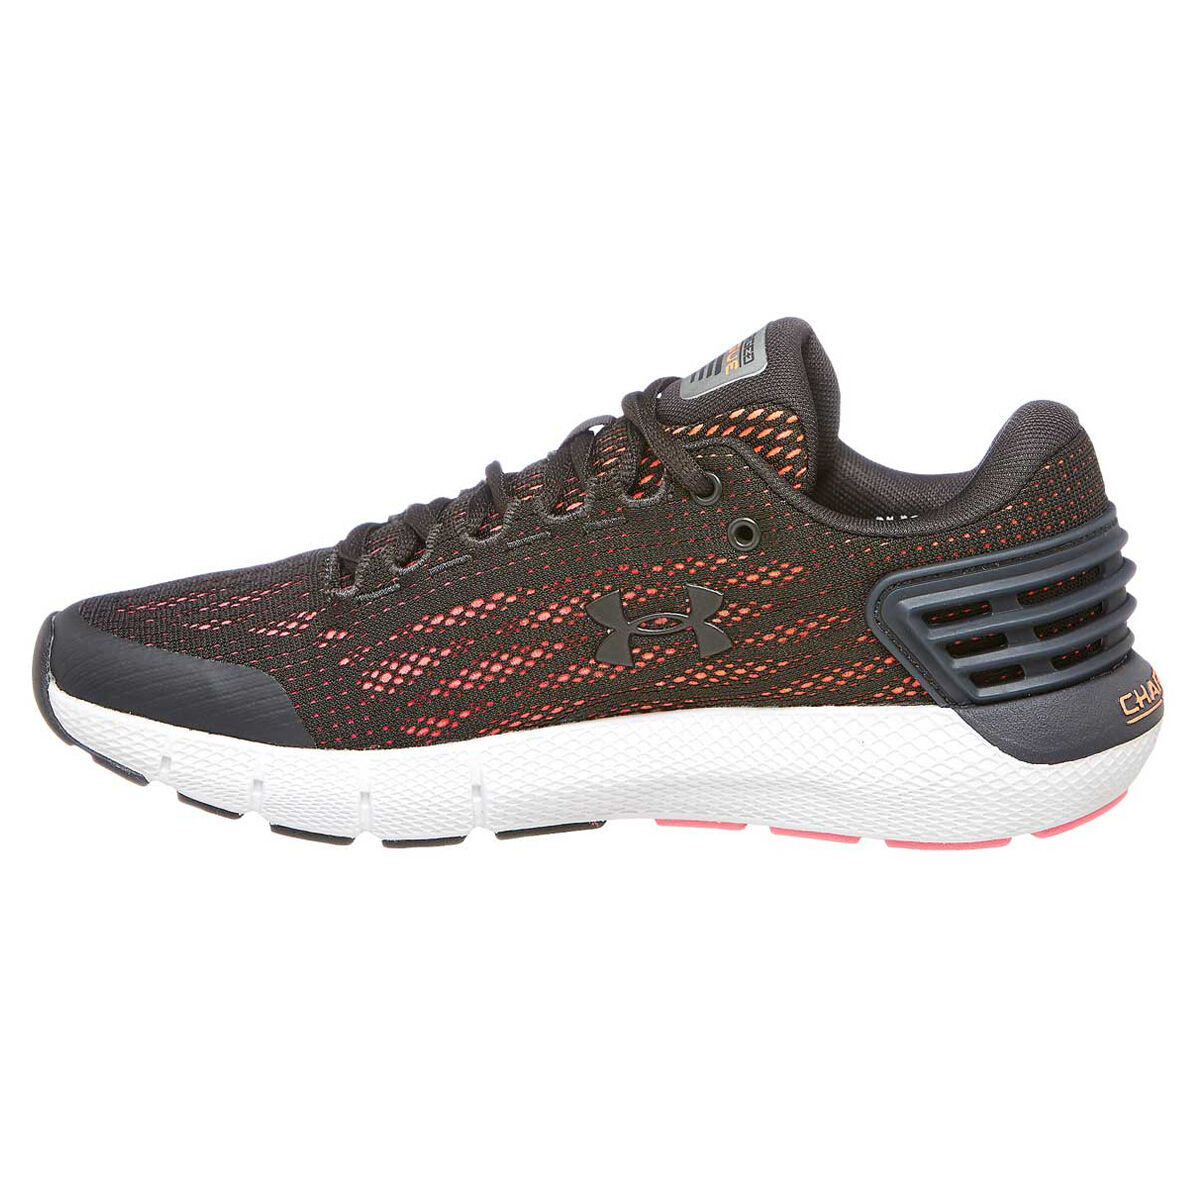 under armour charged rogue women's running shoes